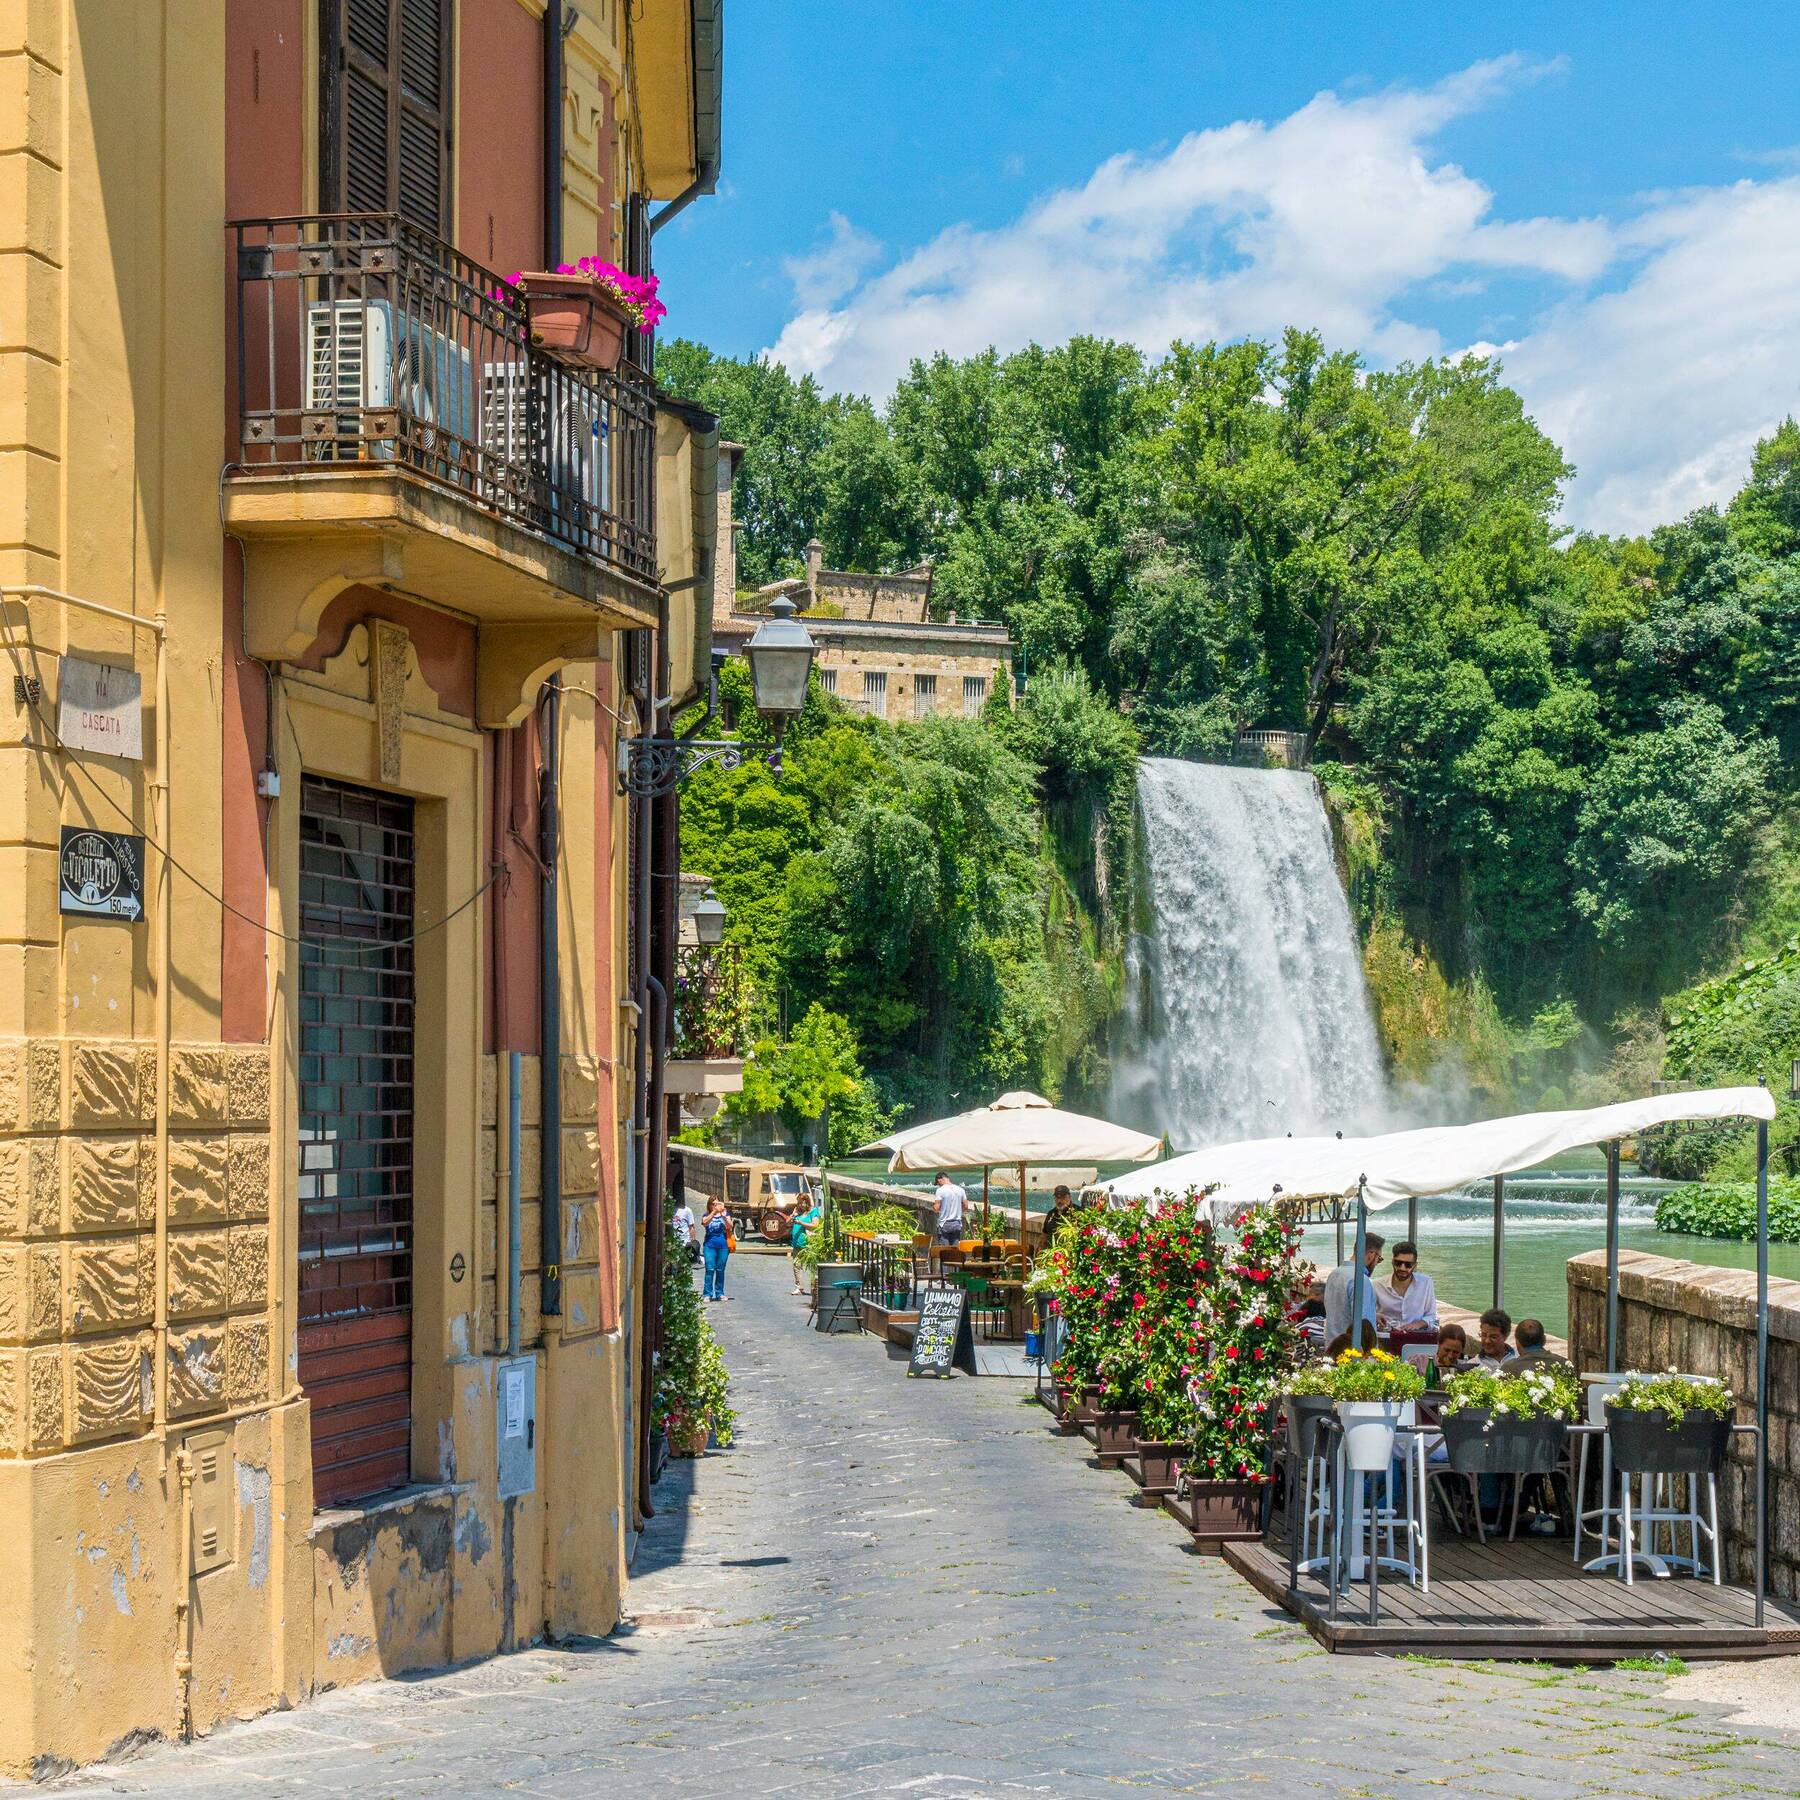 country to visit near rome